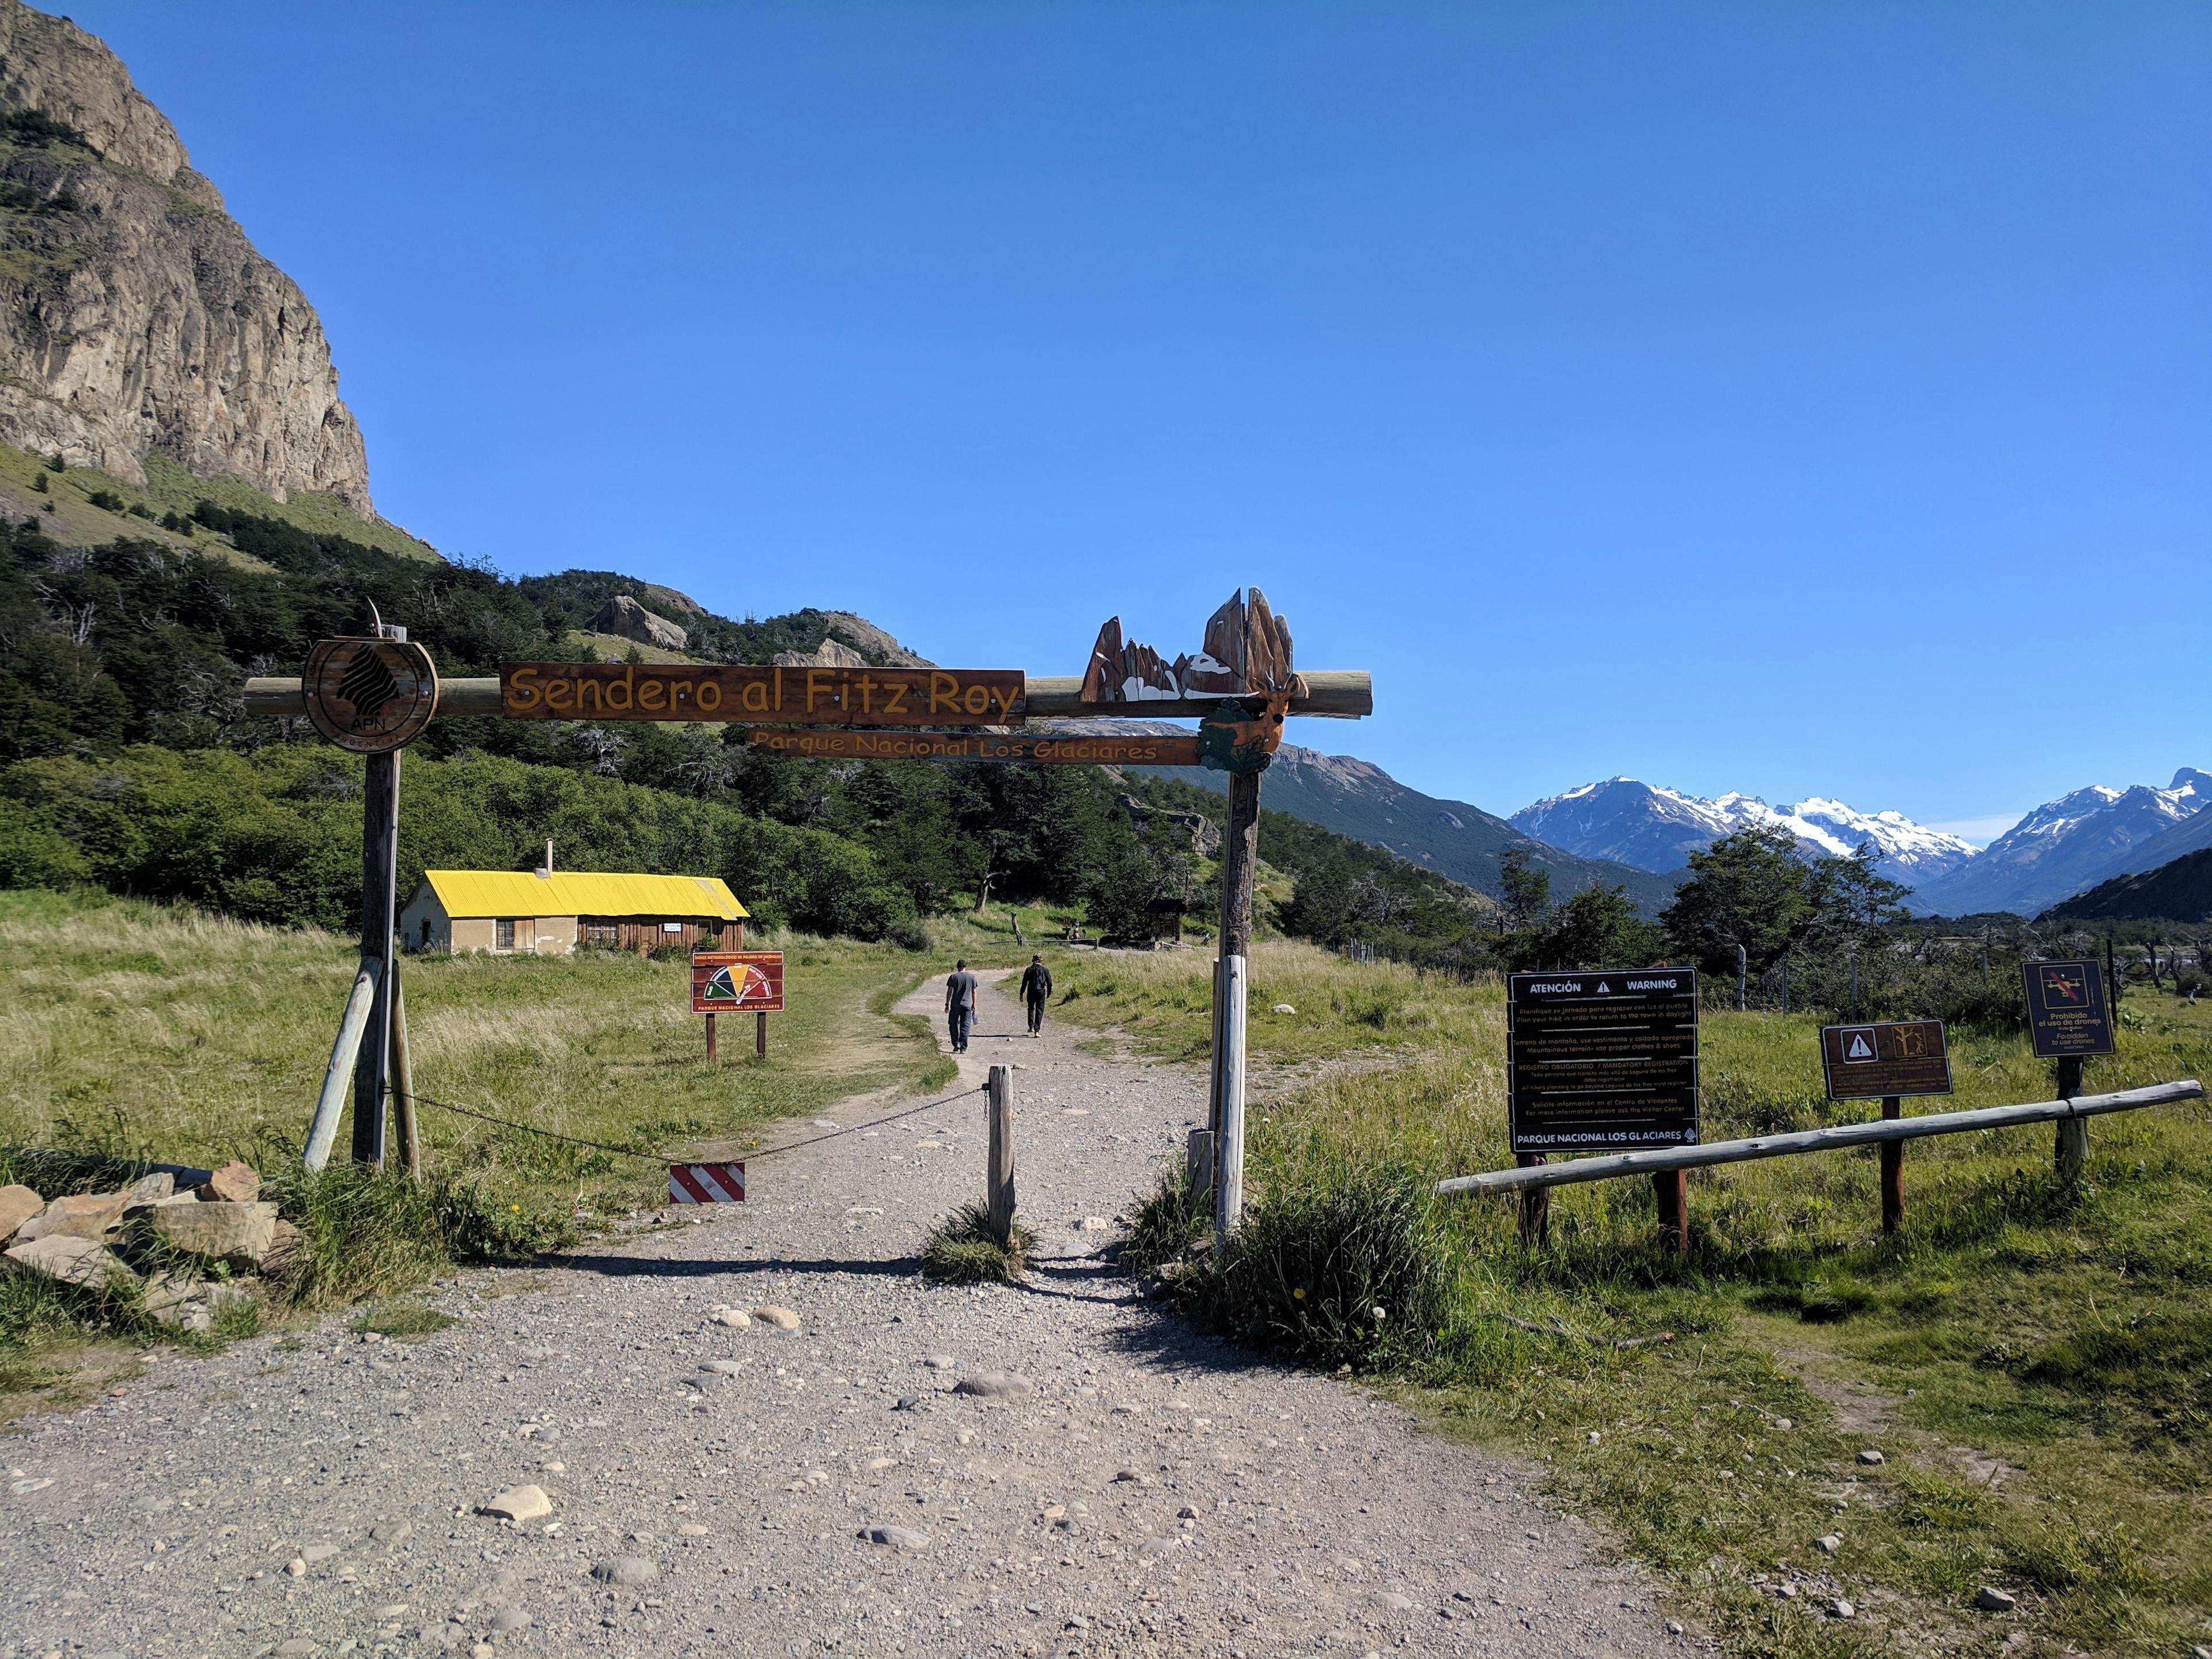 Start of the trail to Fitz Roy